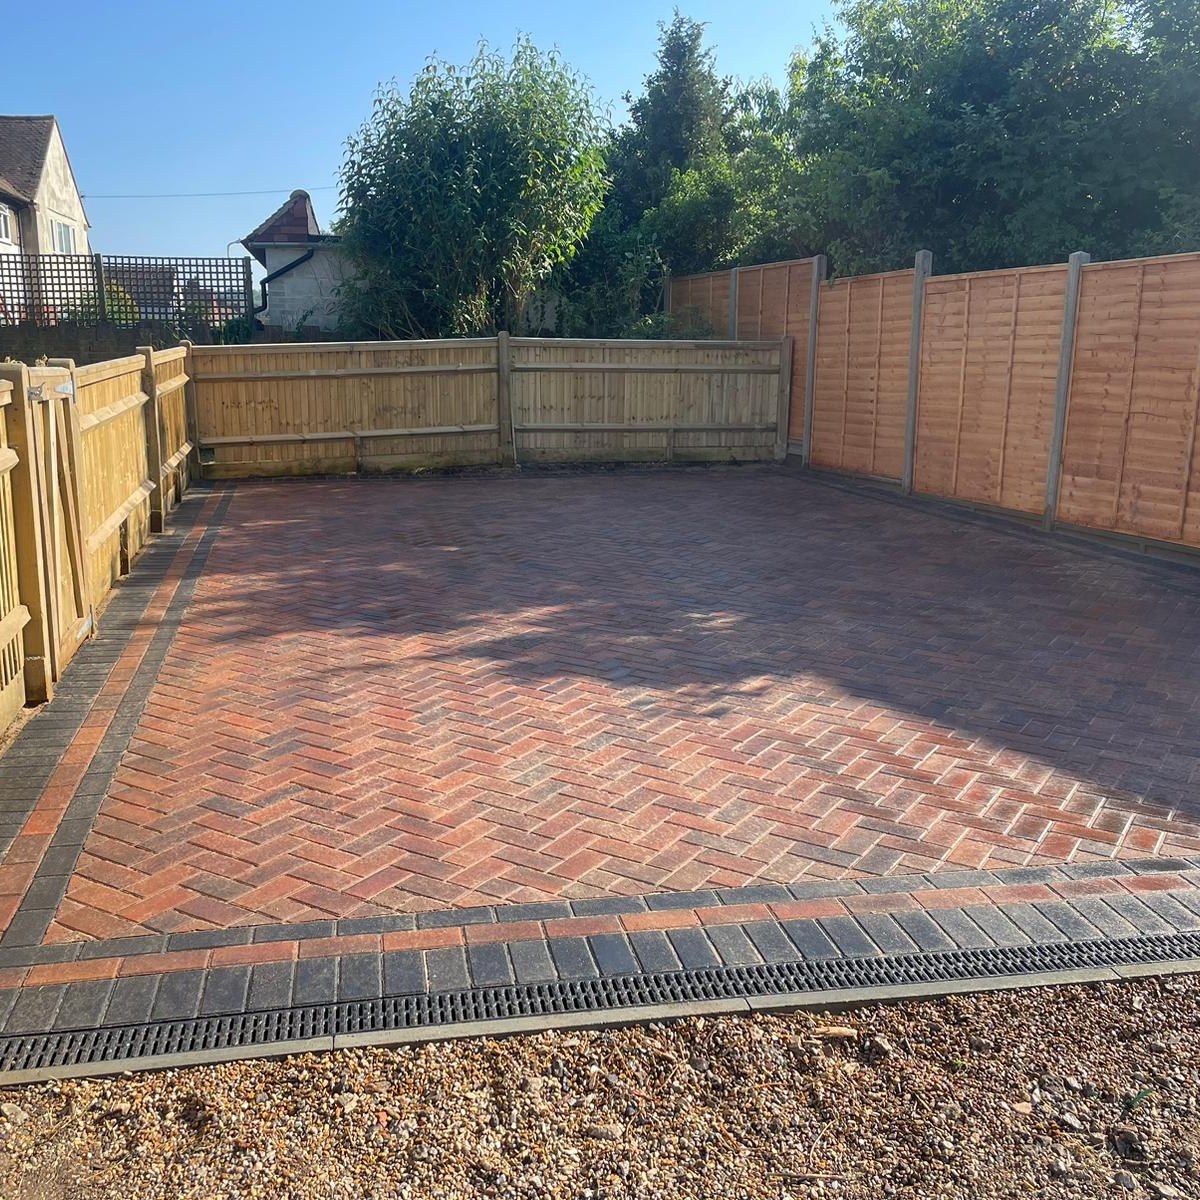 👉 This project was completed in Victoria Drive, Eastbourne and what a 💥change for the homeowner and now they have a usable space. ☎️ 01323 887 678 #gladstonepaving #driveways #patios #patio #landscape #landscaping #resin #paving #home #property #eastsussex #eastbourne